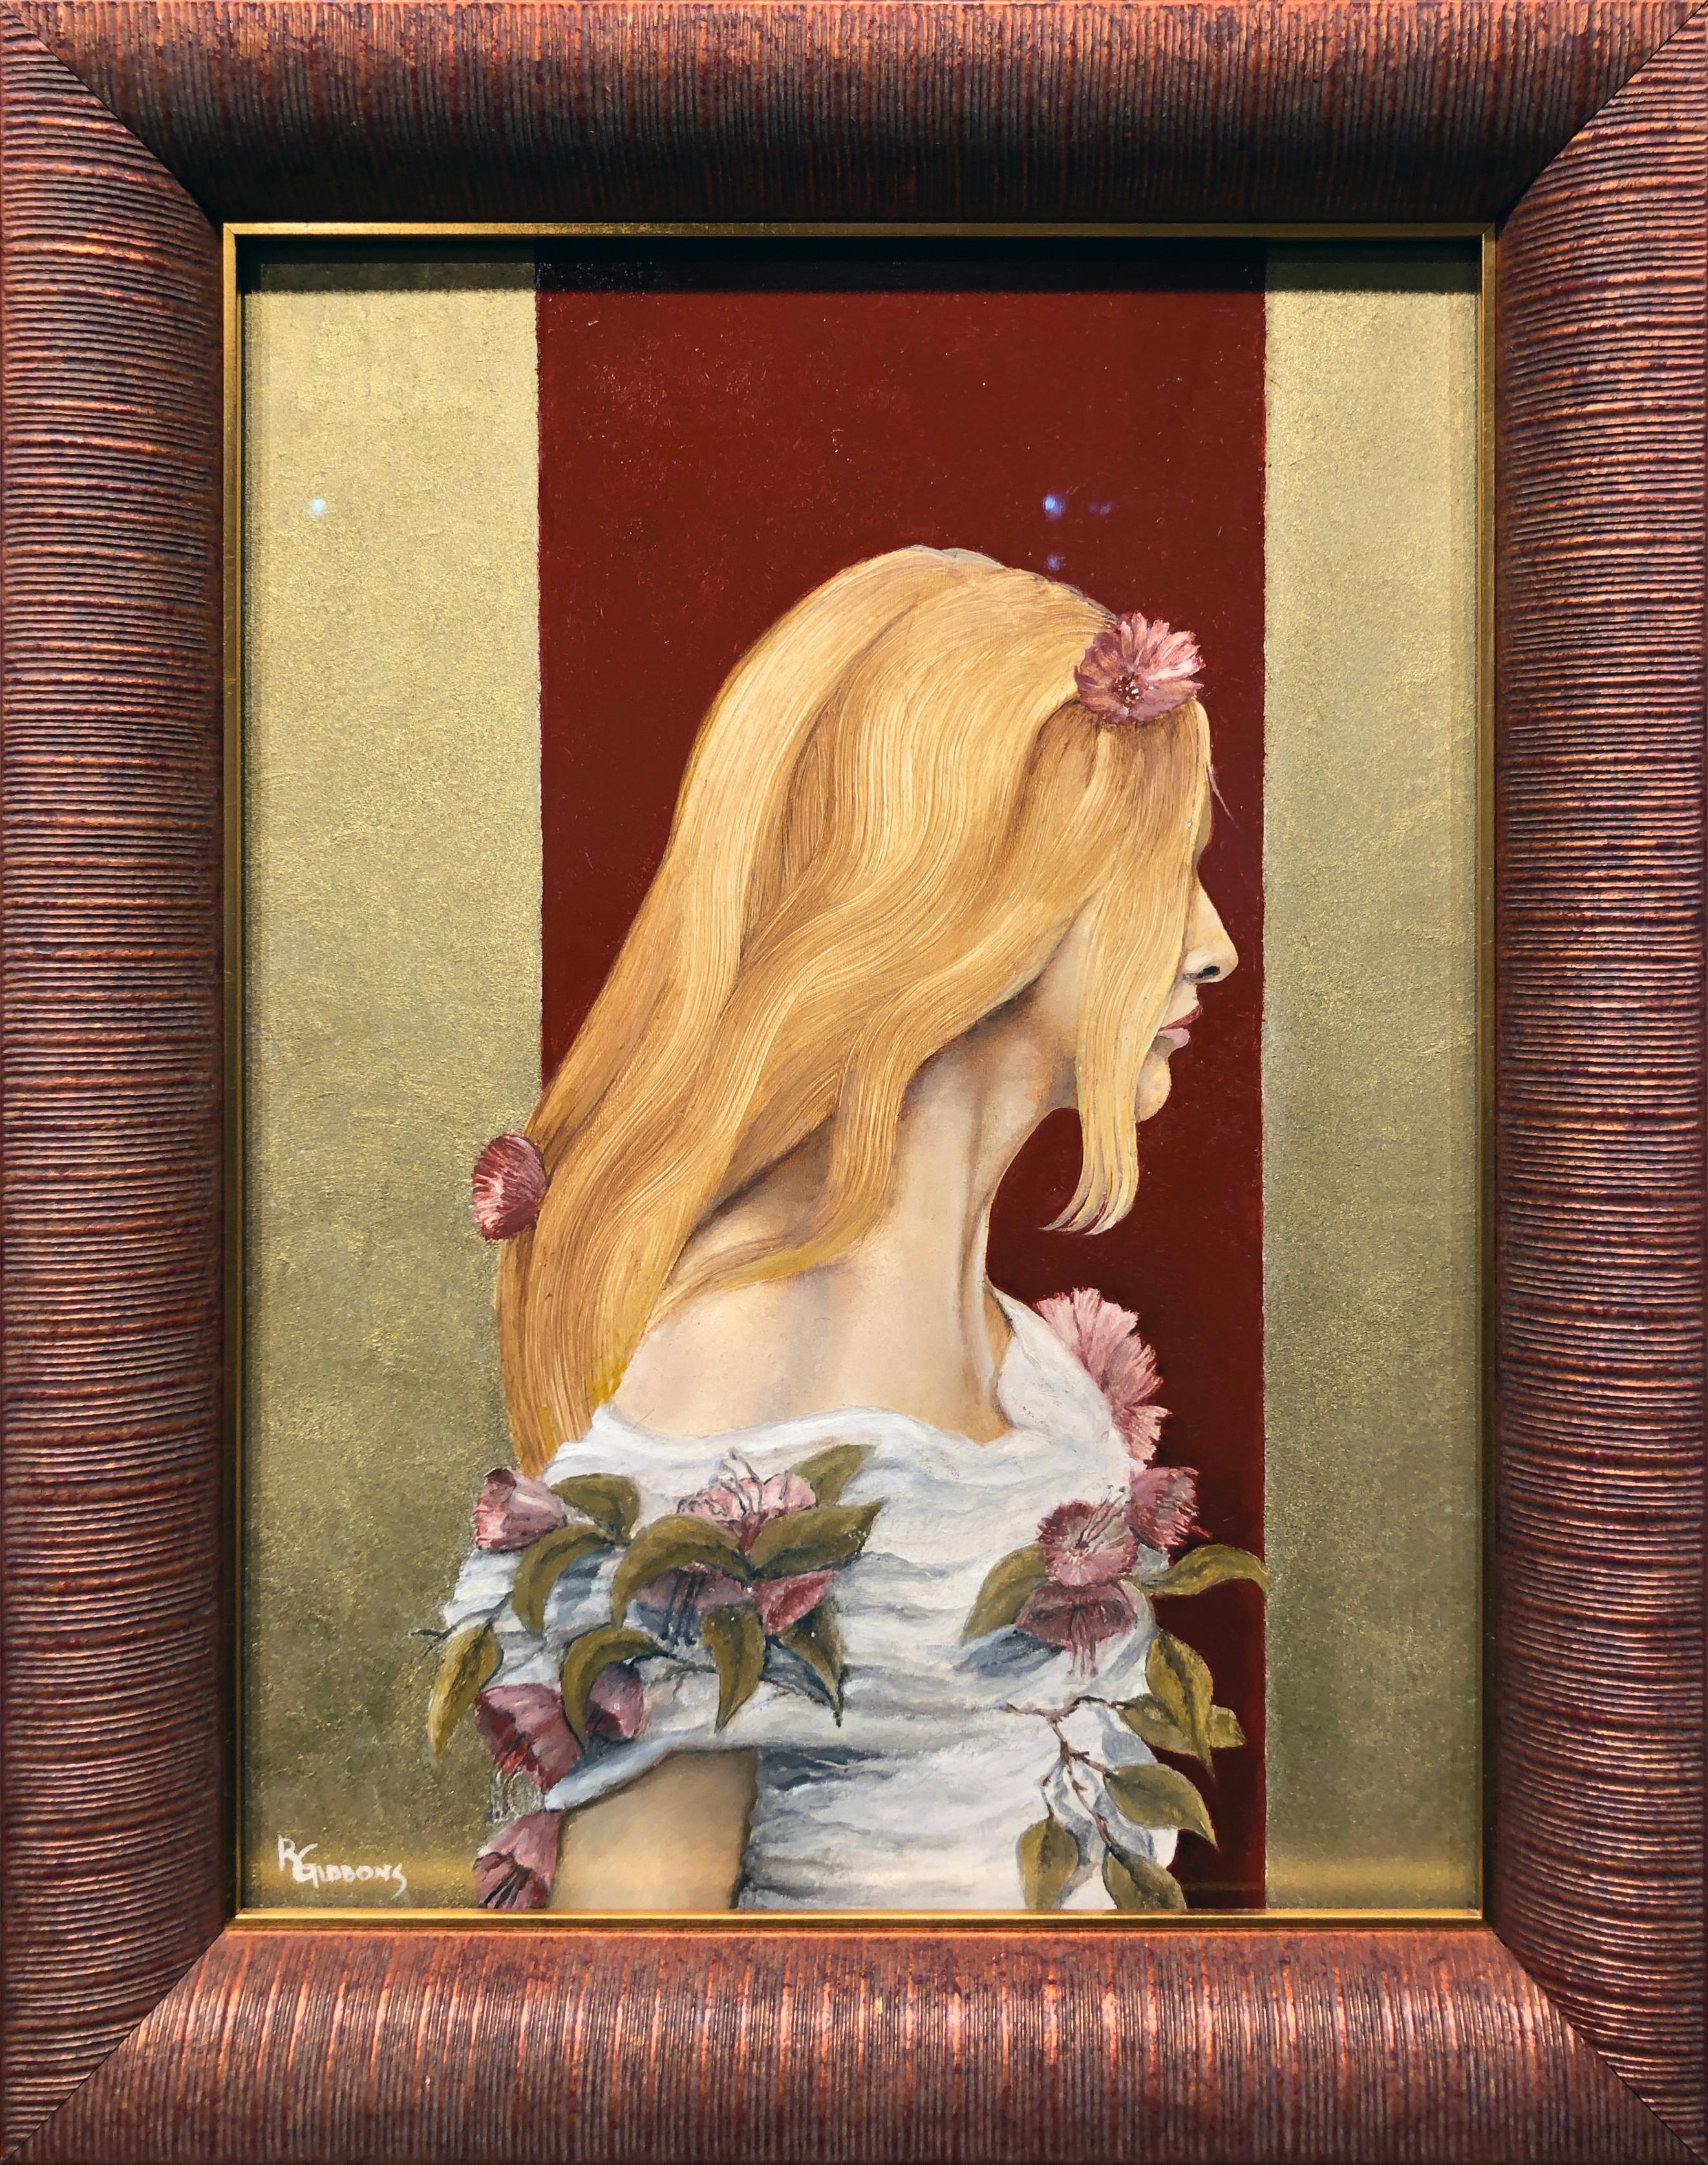 Richard Gibbons Figurative Painting - Victoria, Blond Haired Female Dressed in White Tunic with Purple Flowers, Framed